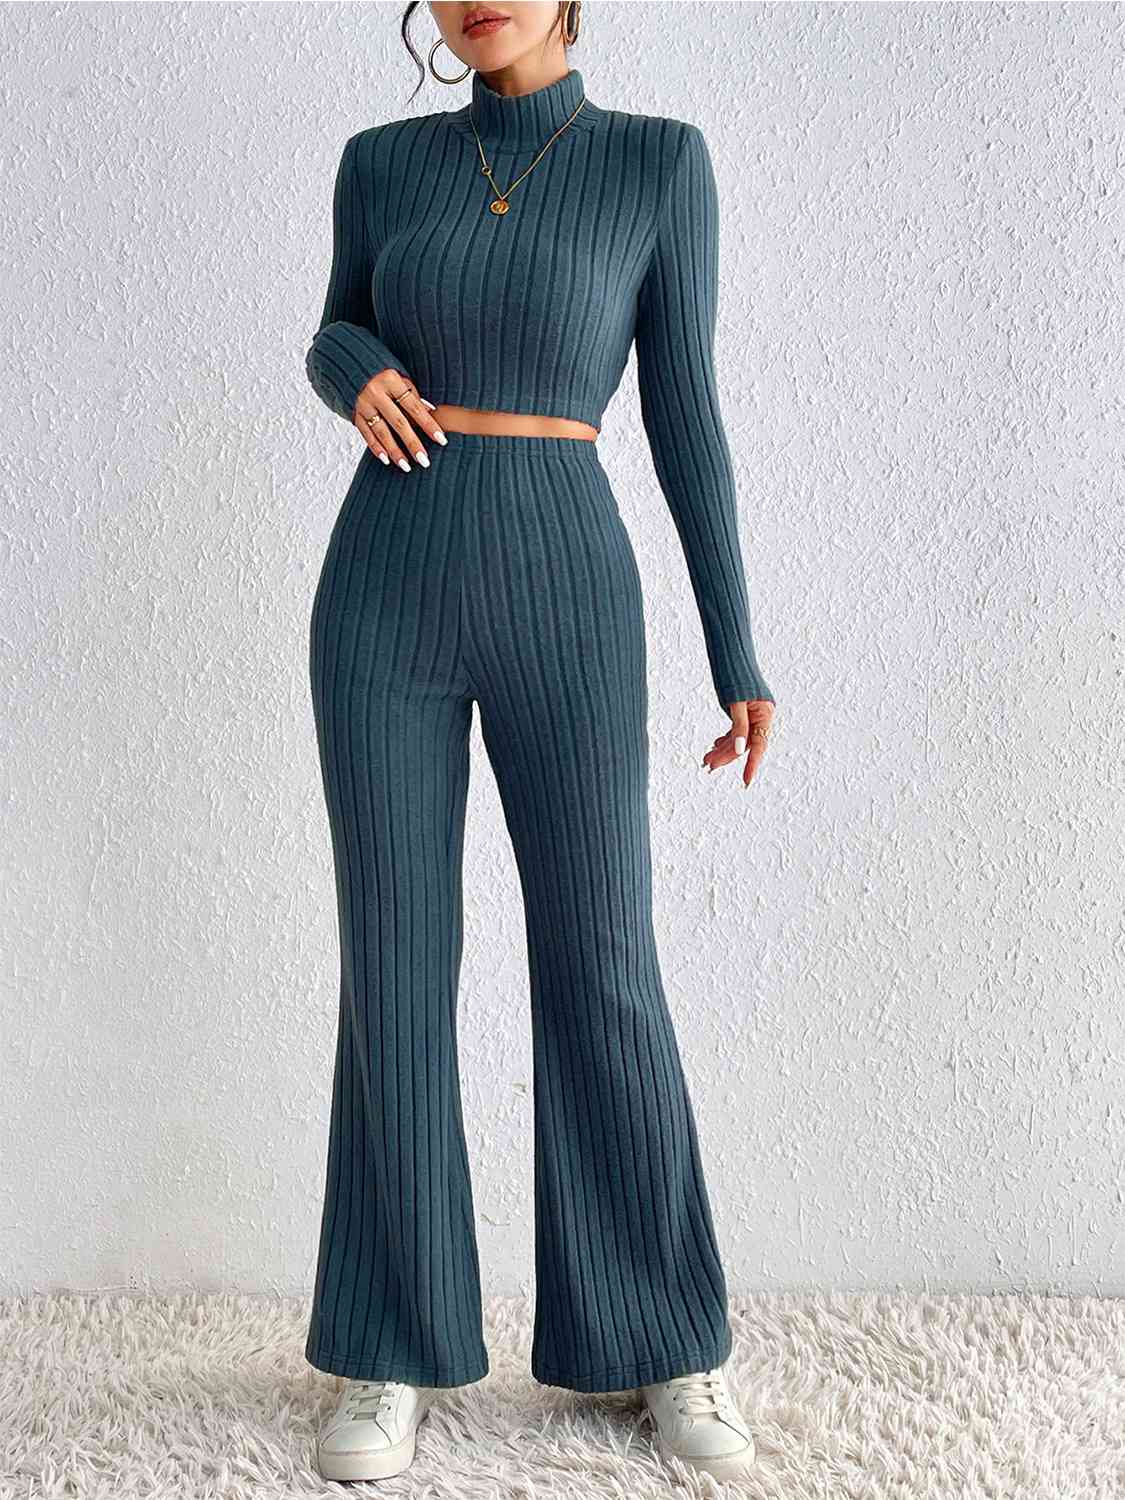 Ribbed Mock Neck Cropped Sweater & High Waist Pants Set BLUE ZONE PLANET